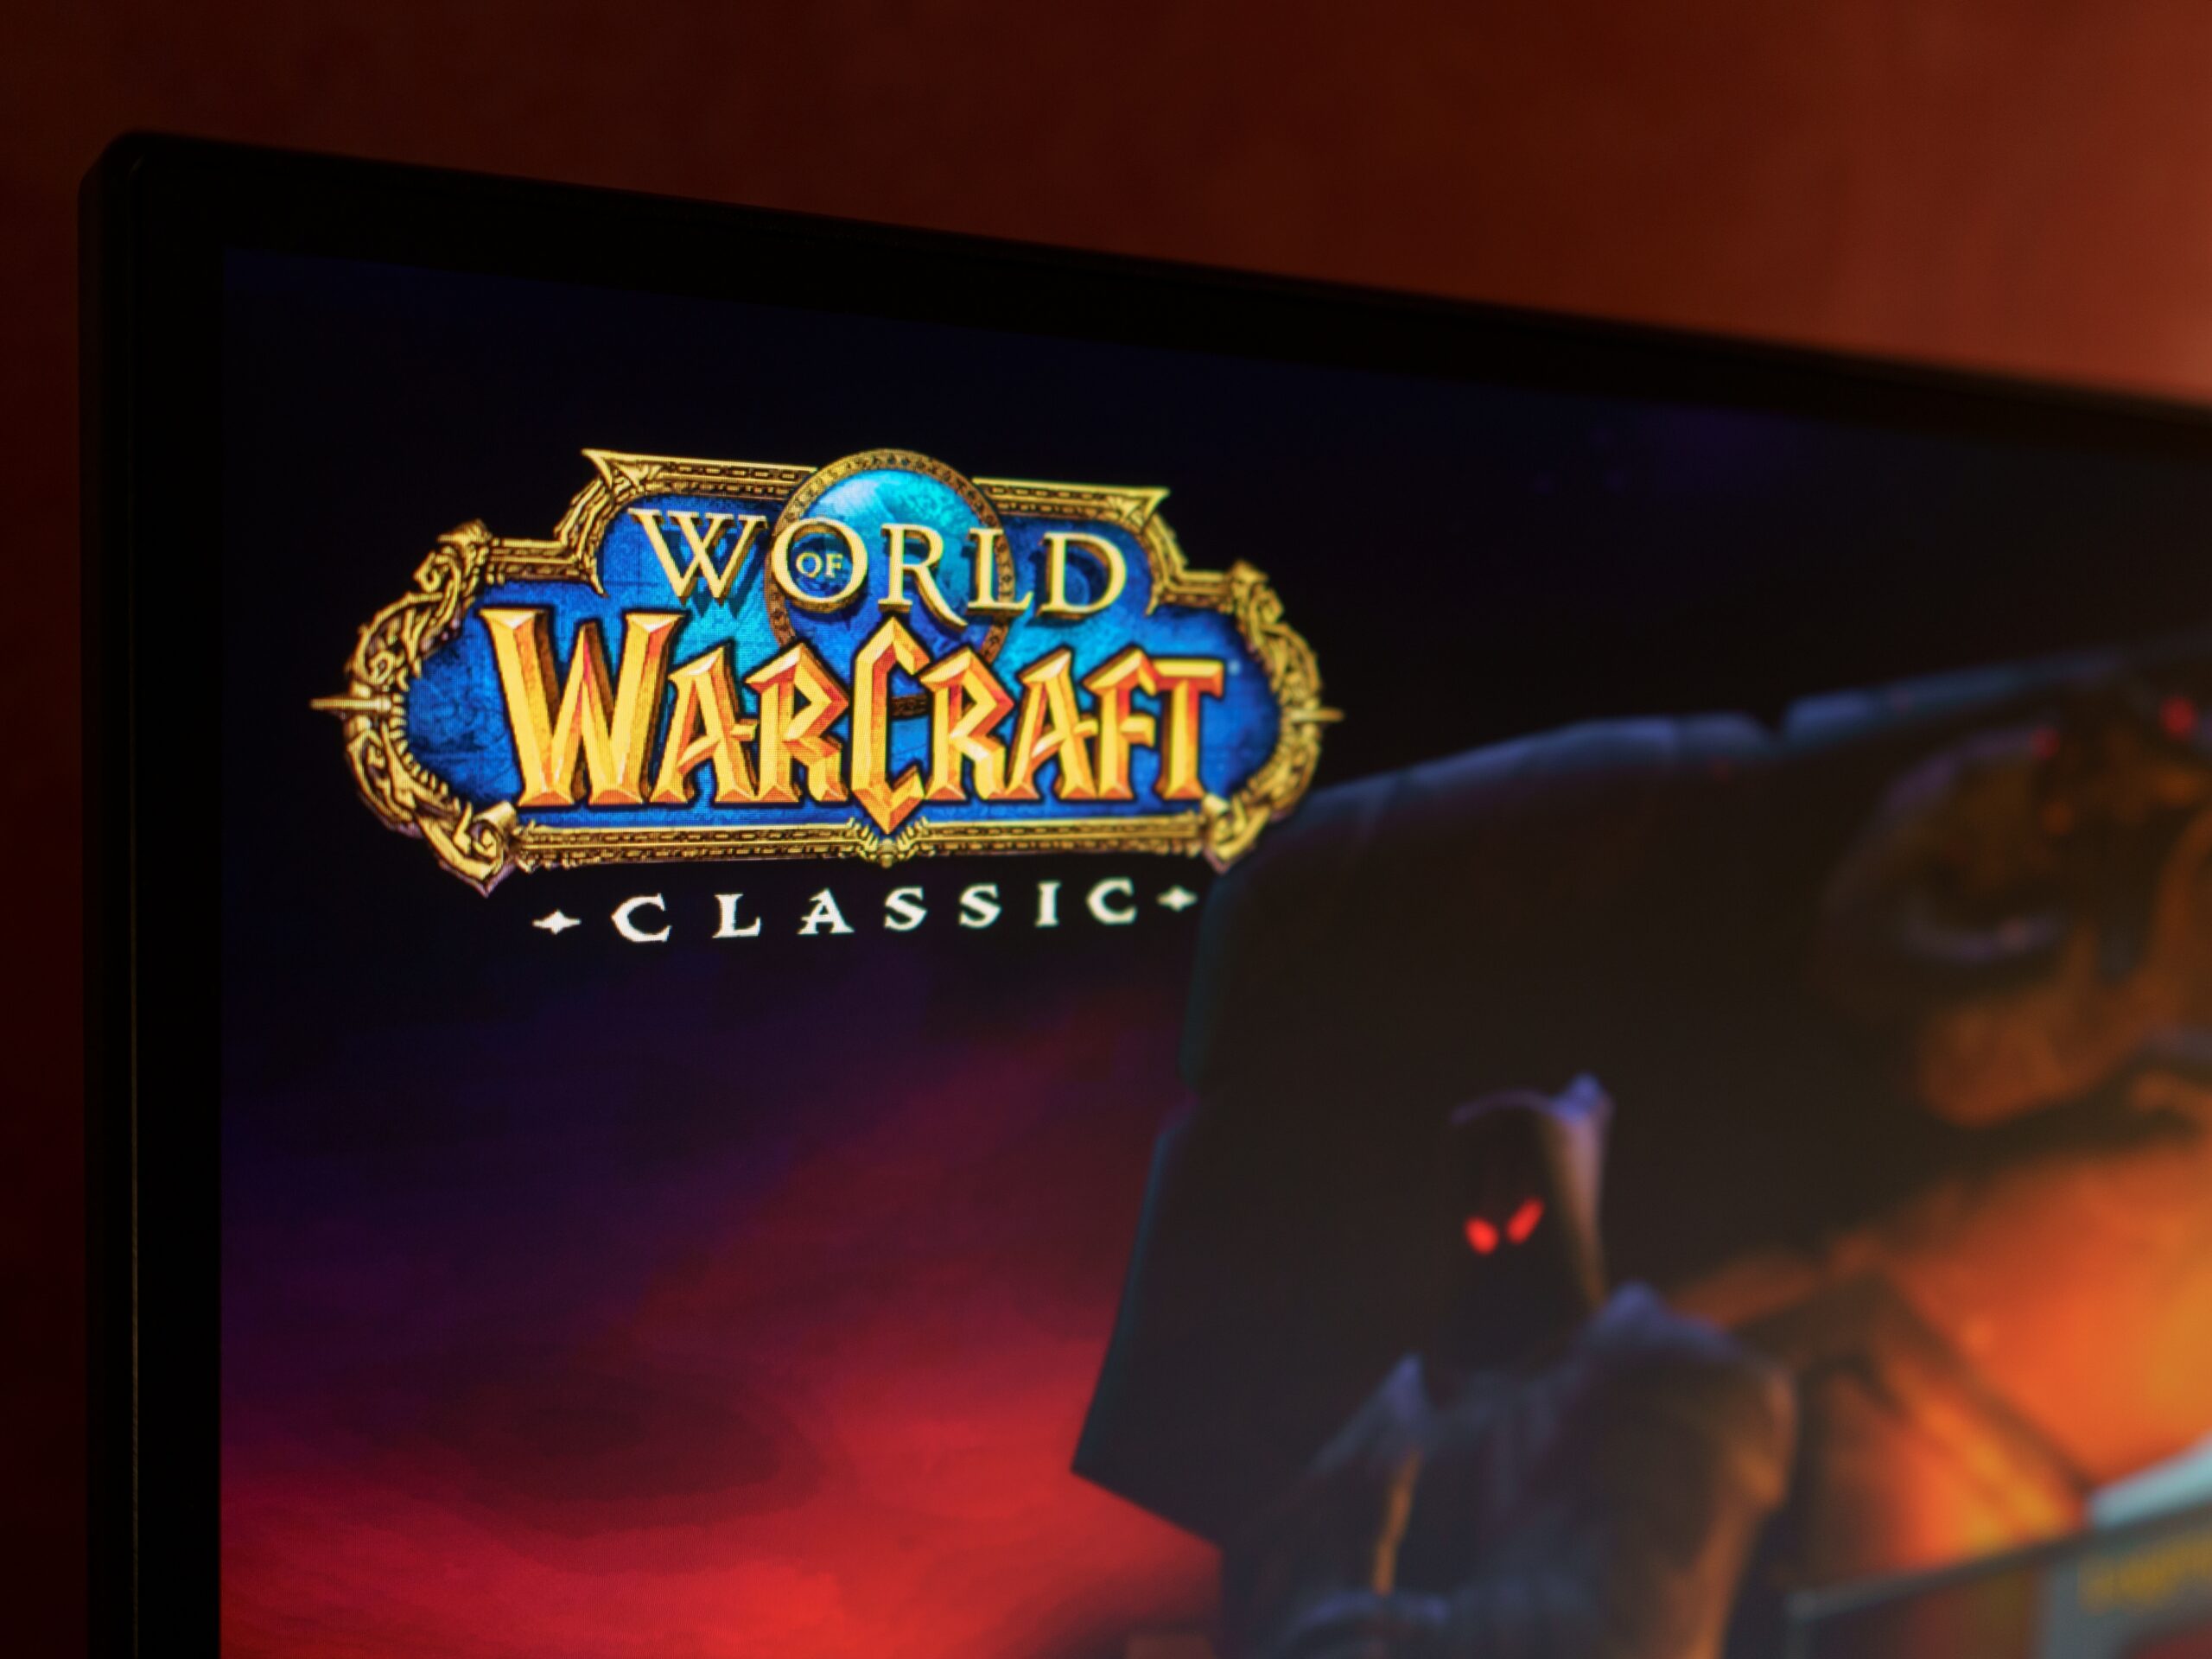 Geek insider, geekinsider, geekinsider. Com,, embarking on a timeless adventure: unveiling the magic of world of warcraft classic, gaming